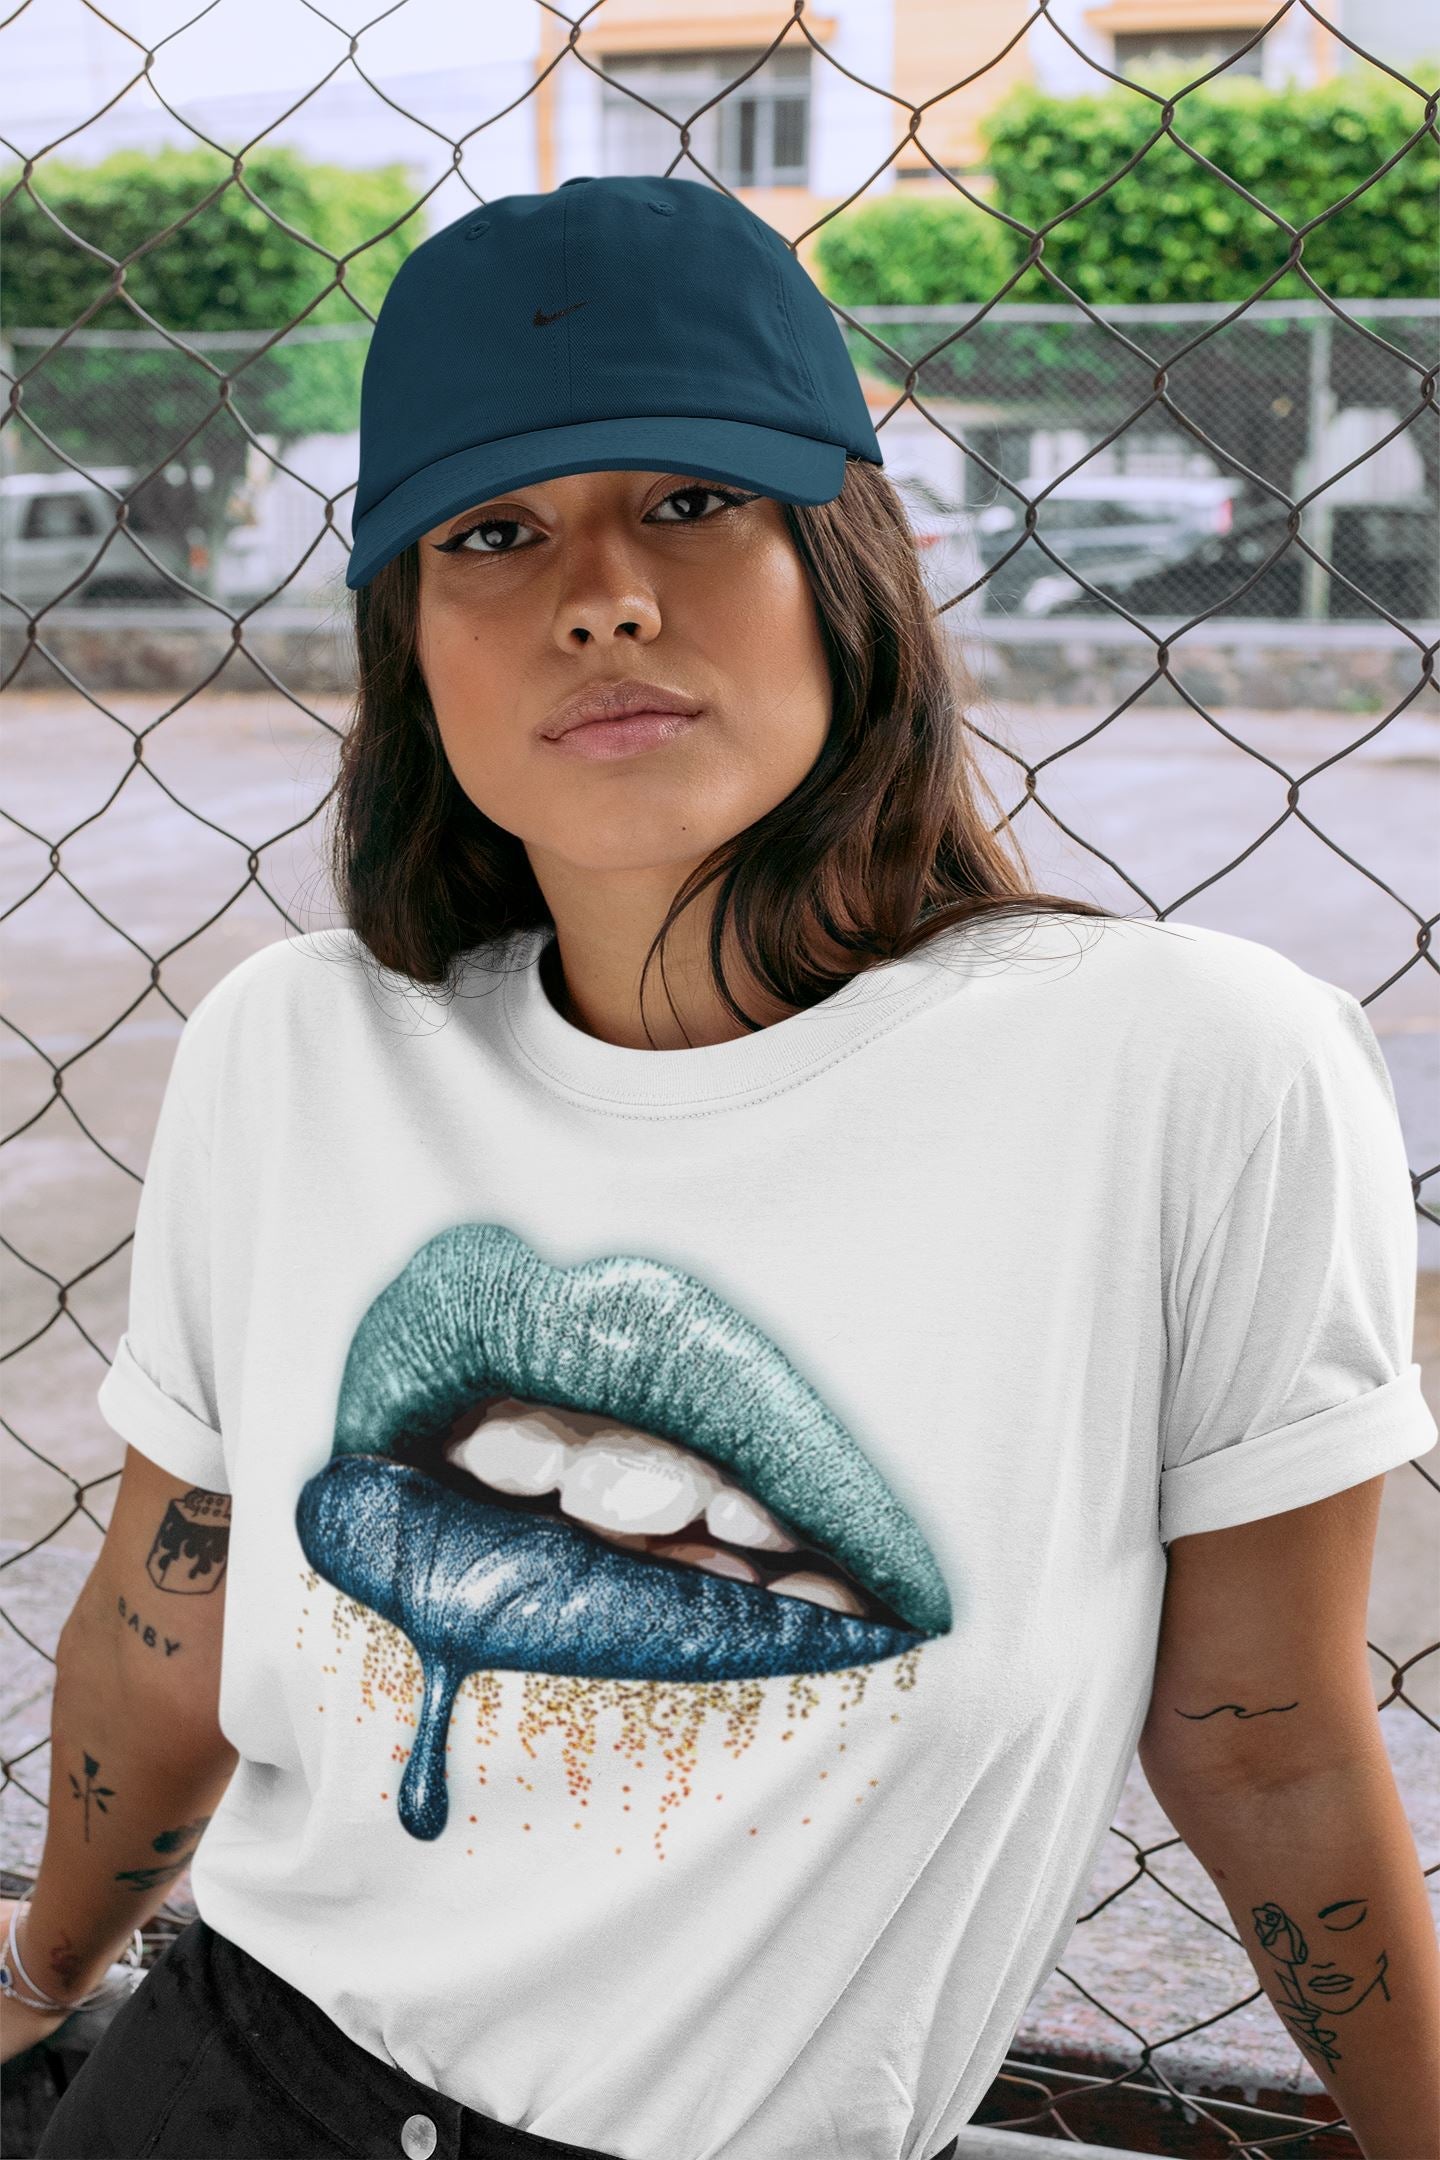 Yeezy 700 Faded Azure Sneaker Match Tees Dripping Lips Sneaker Tees Yeezy 700 Faded Azure Sneaker Release Tees Unisex Shirts